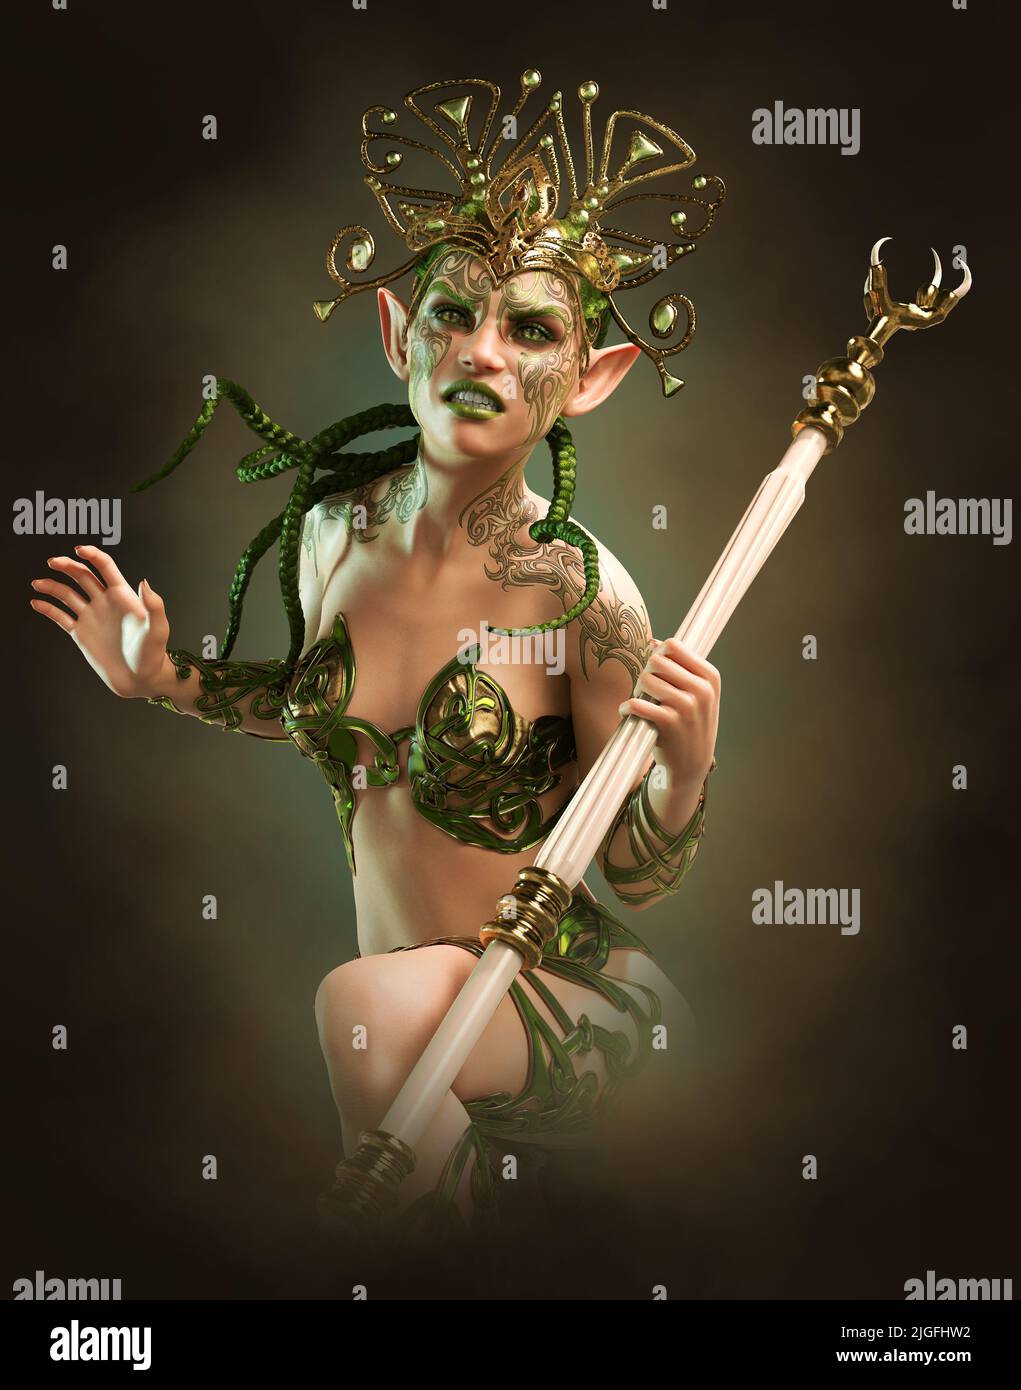 3d computer graphics of a fairy with face tattoo, headdress and wand Stock Photo